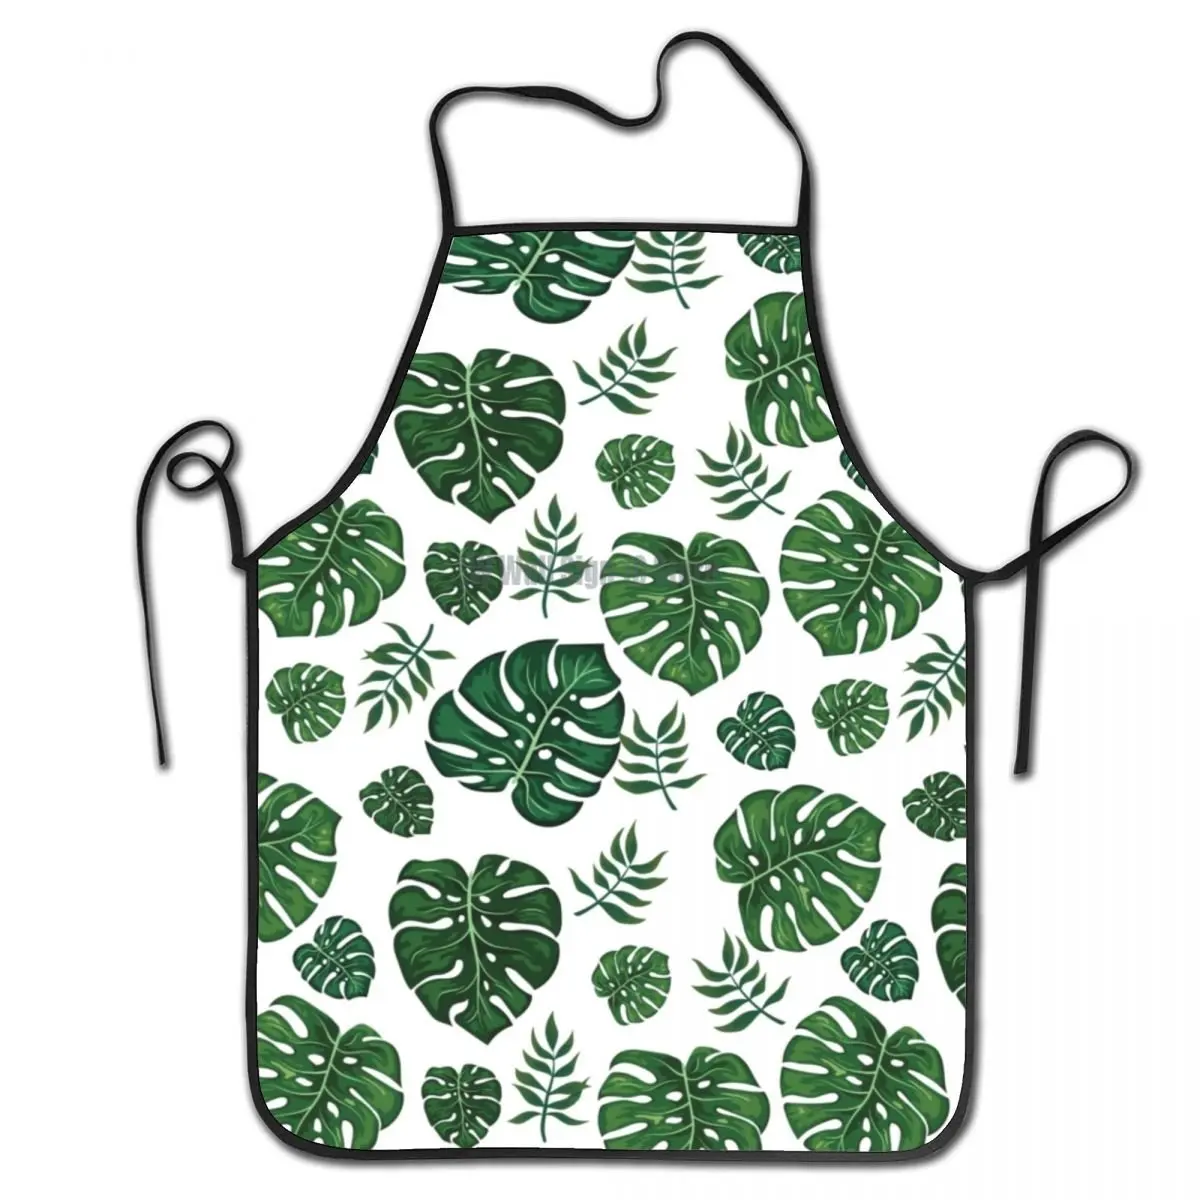 

Custom Bib Beautiful Green Leaves Tropical Plant Aprons for Men Women Unisex Adult Chef Cooking Kitchen Tablier Cuisine Painting